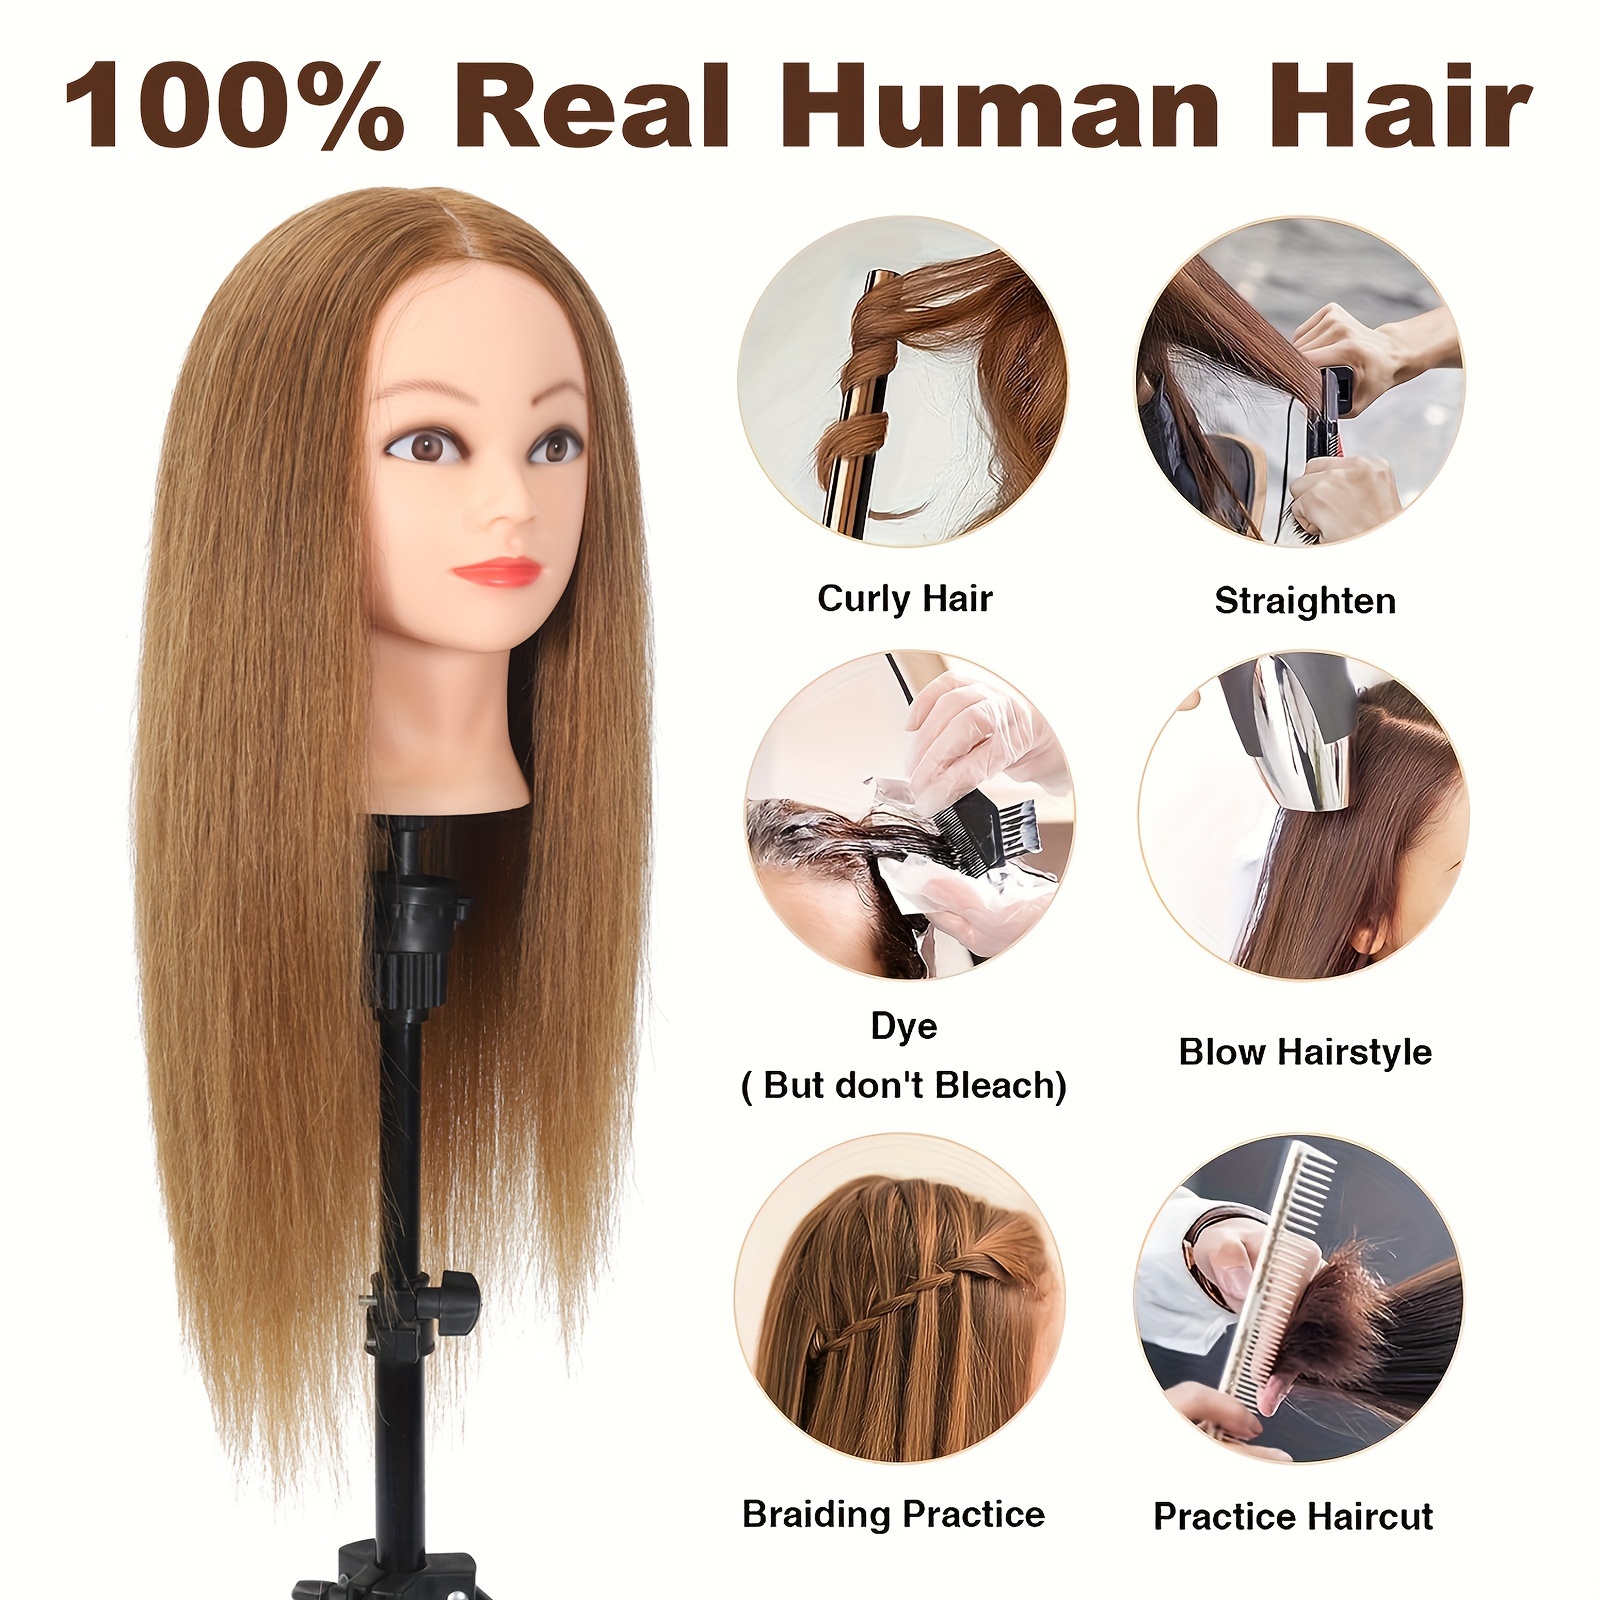 Maniquin Head with 80% Human Hair, 24'' Doll Head for Hair Styling, Manikin  Head with Real Hair, Practice Cosmetology Mannequin Head, DIY Hairdressing